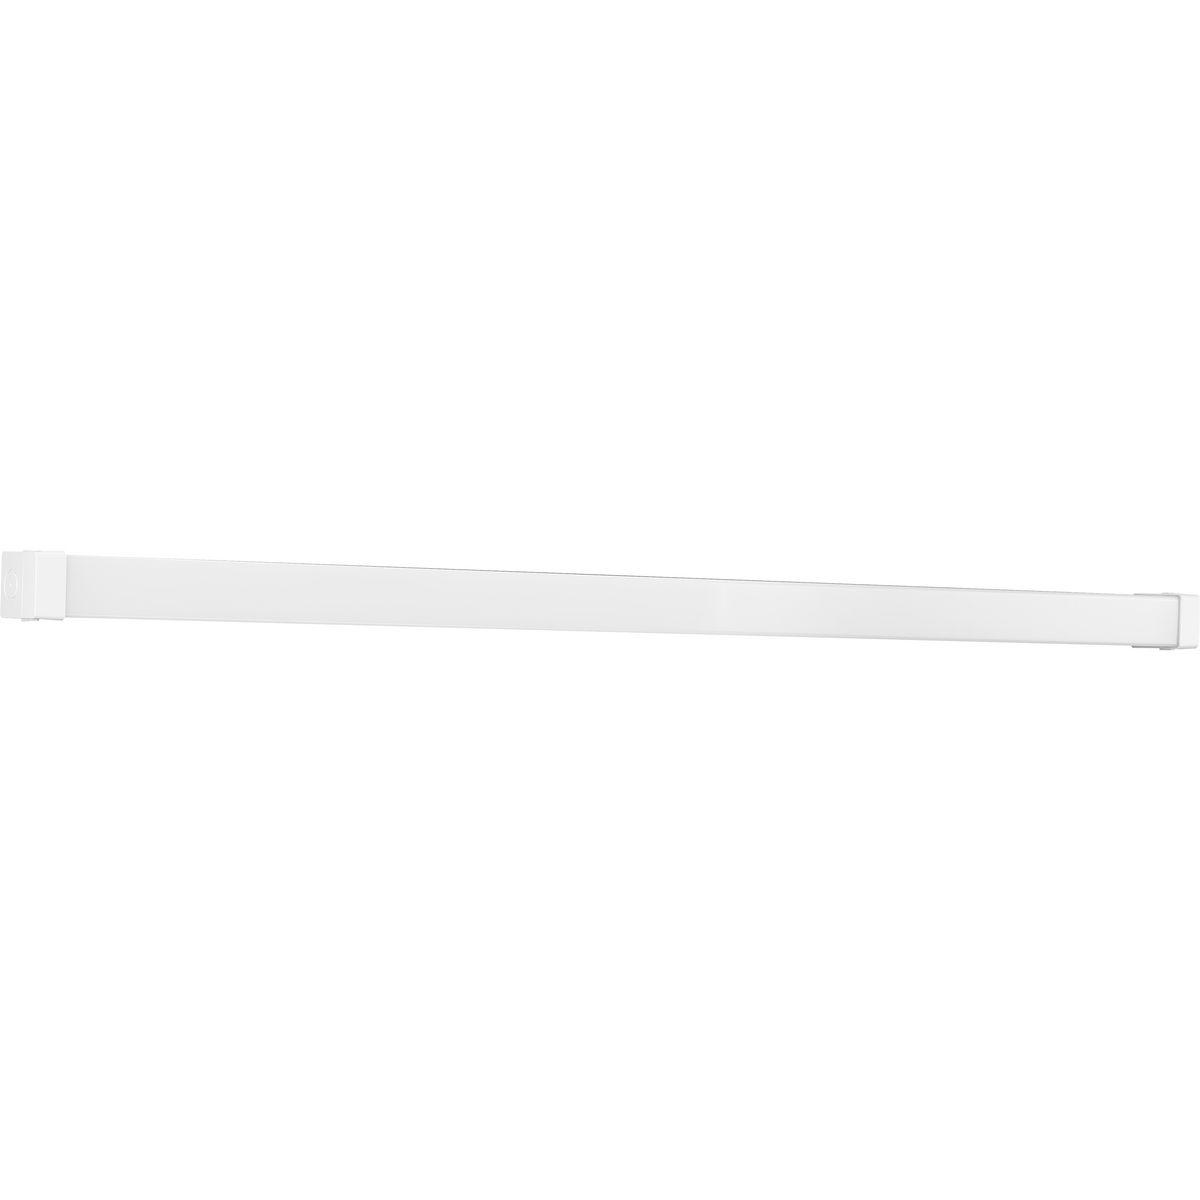 Hubbell P730001-030-30 The Wrap and Strip Collection's Four-Foot LED Strip Light features a crisp white acrylic diffuser shaped into an elegant elongated silhouette. The light fixture is complemented by white end caps and a white metal chassis. The strip light can be mounted on